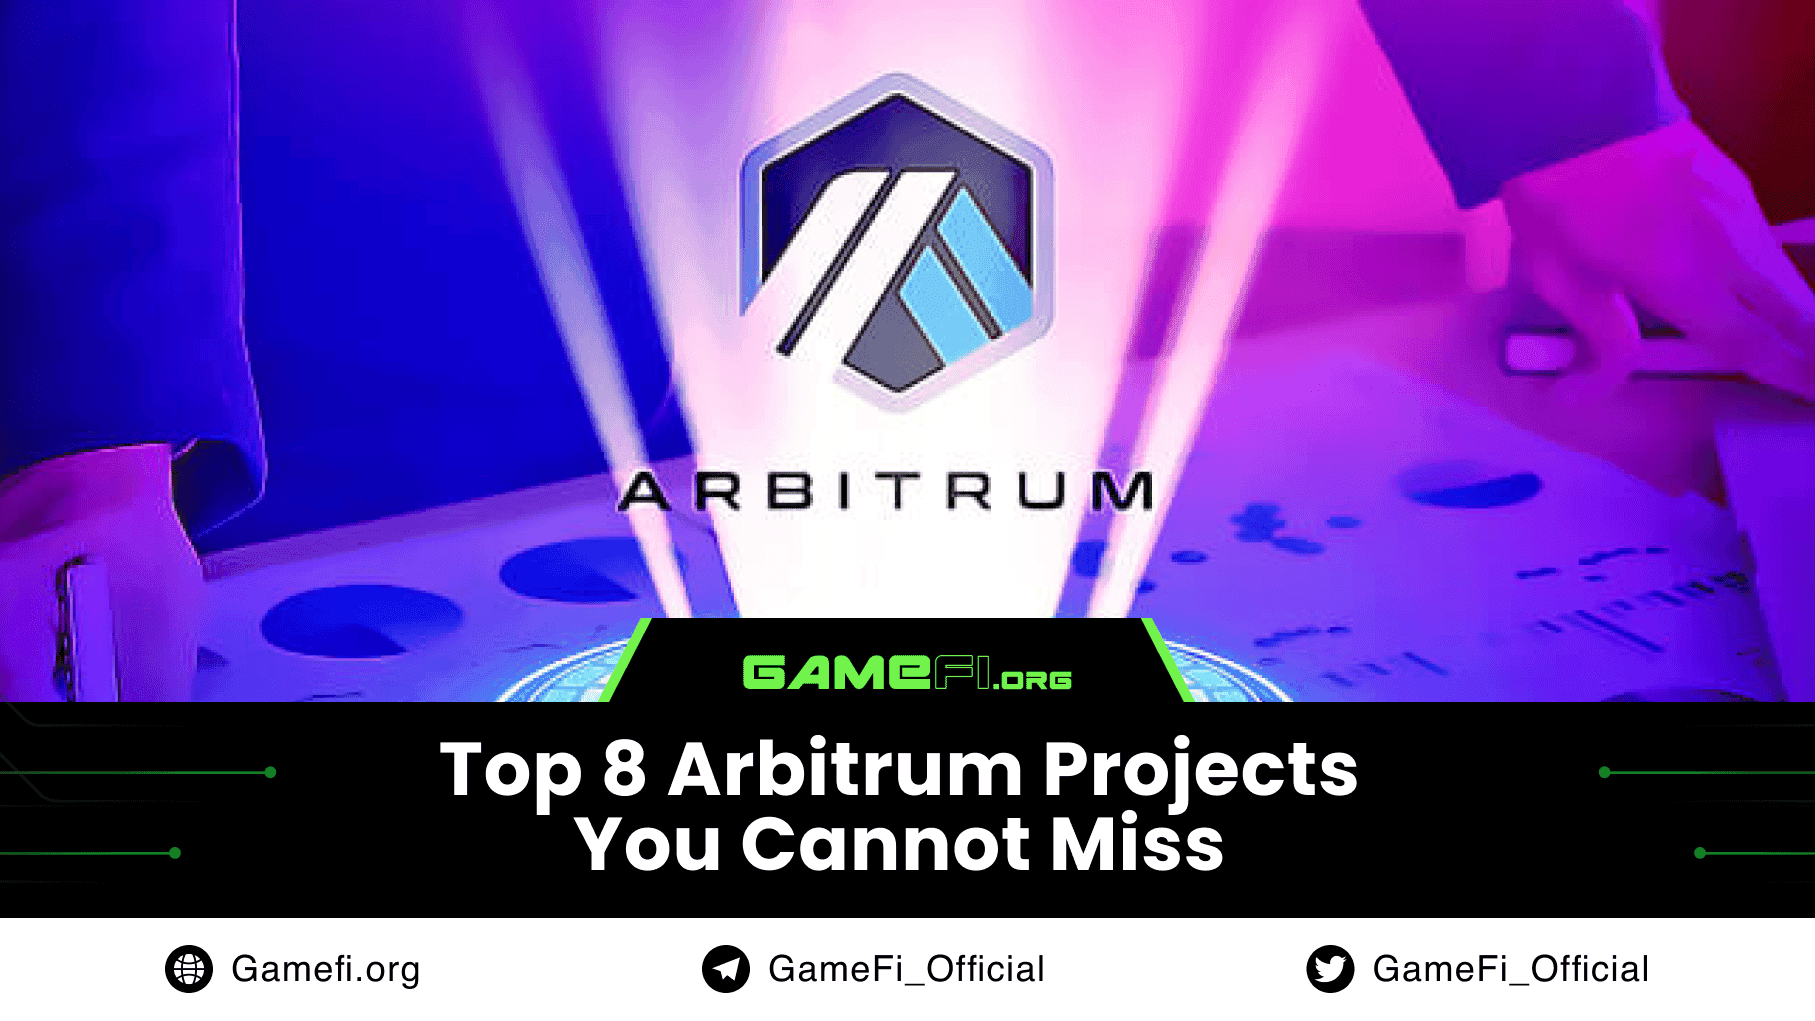 Top 8 Arbitrum Projects You Cannot Miss